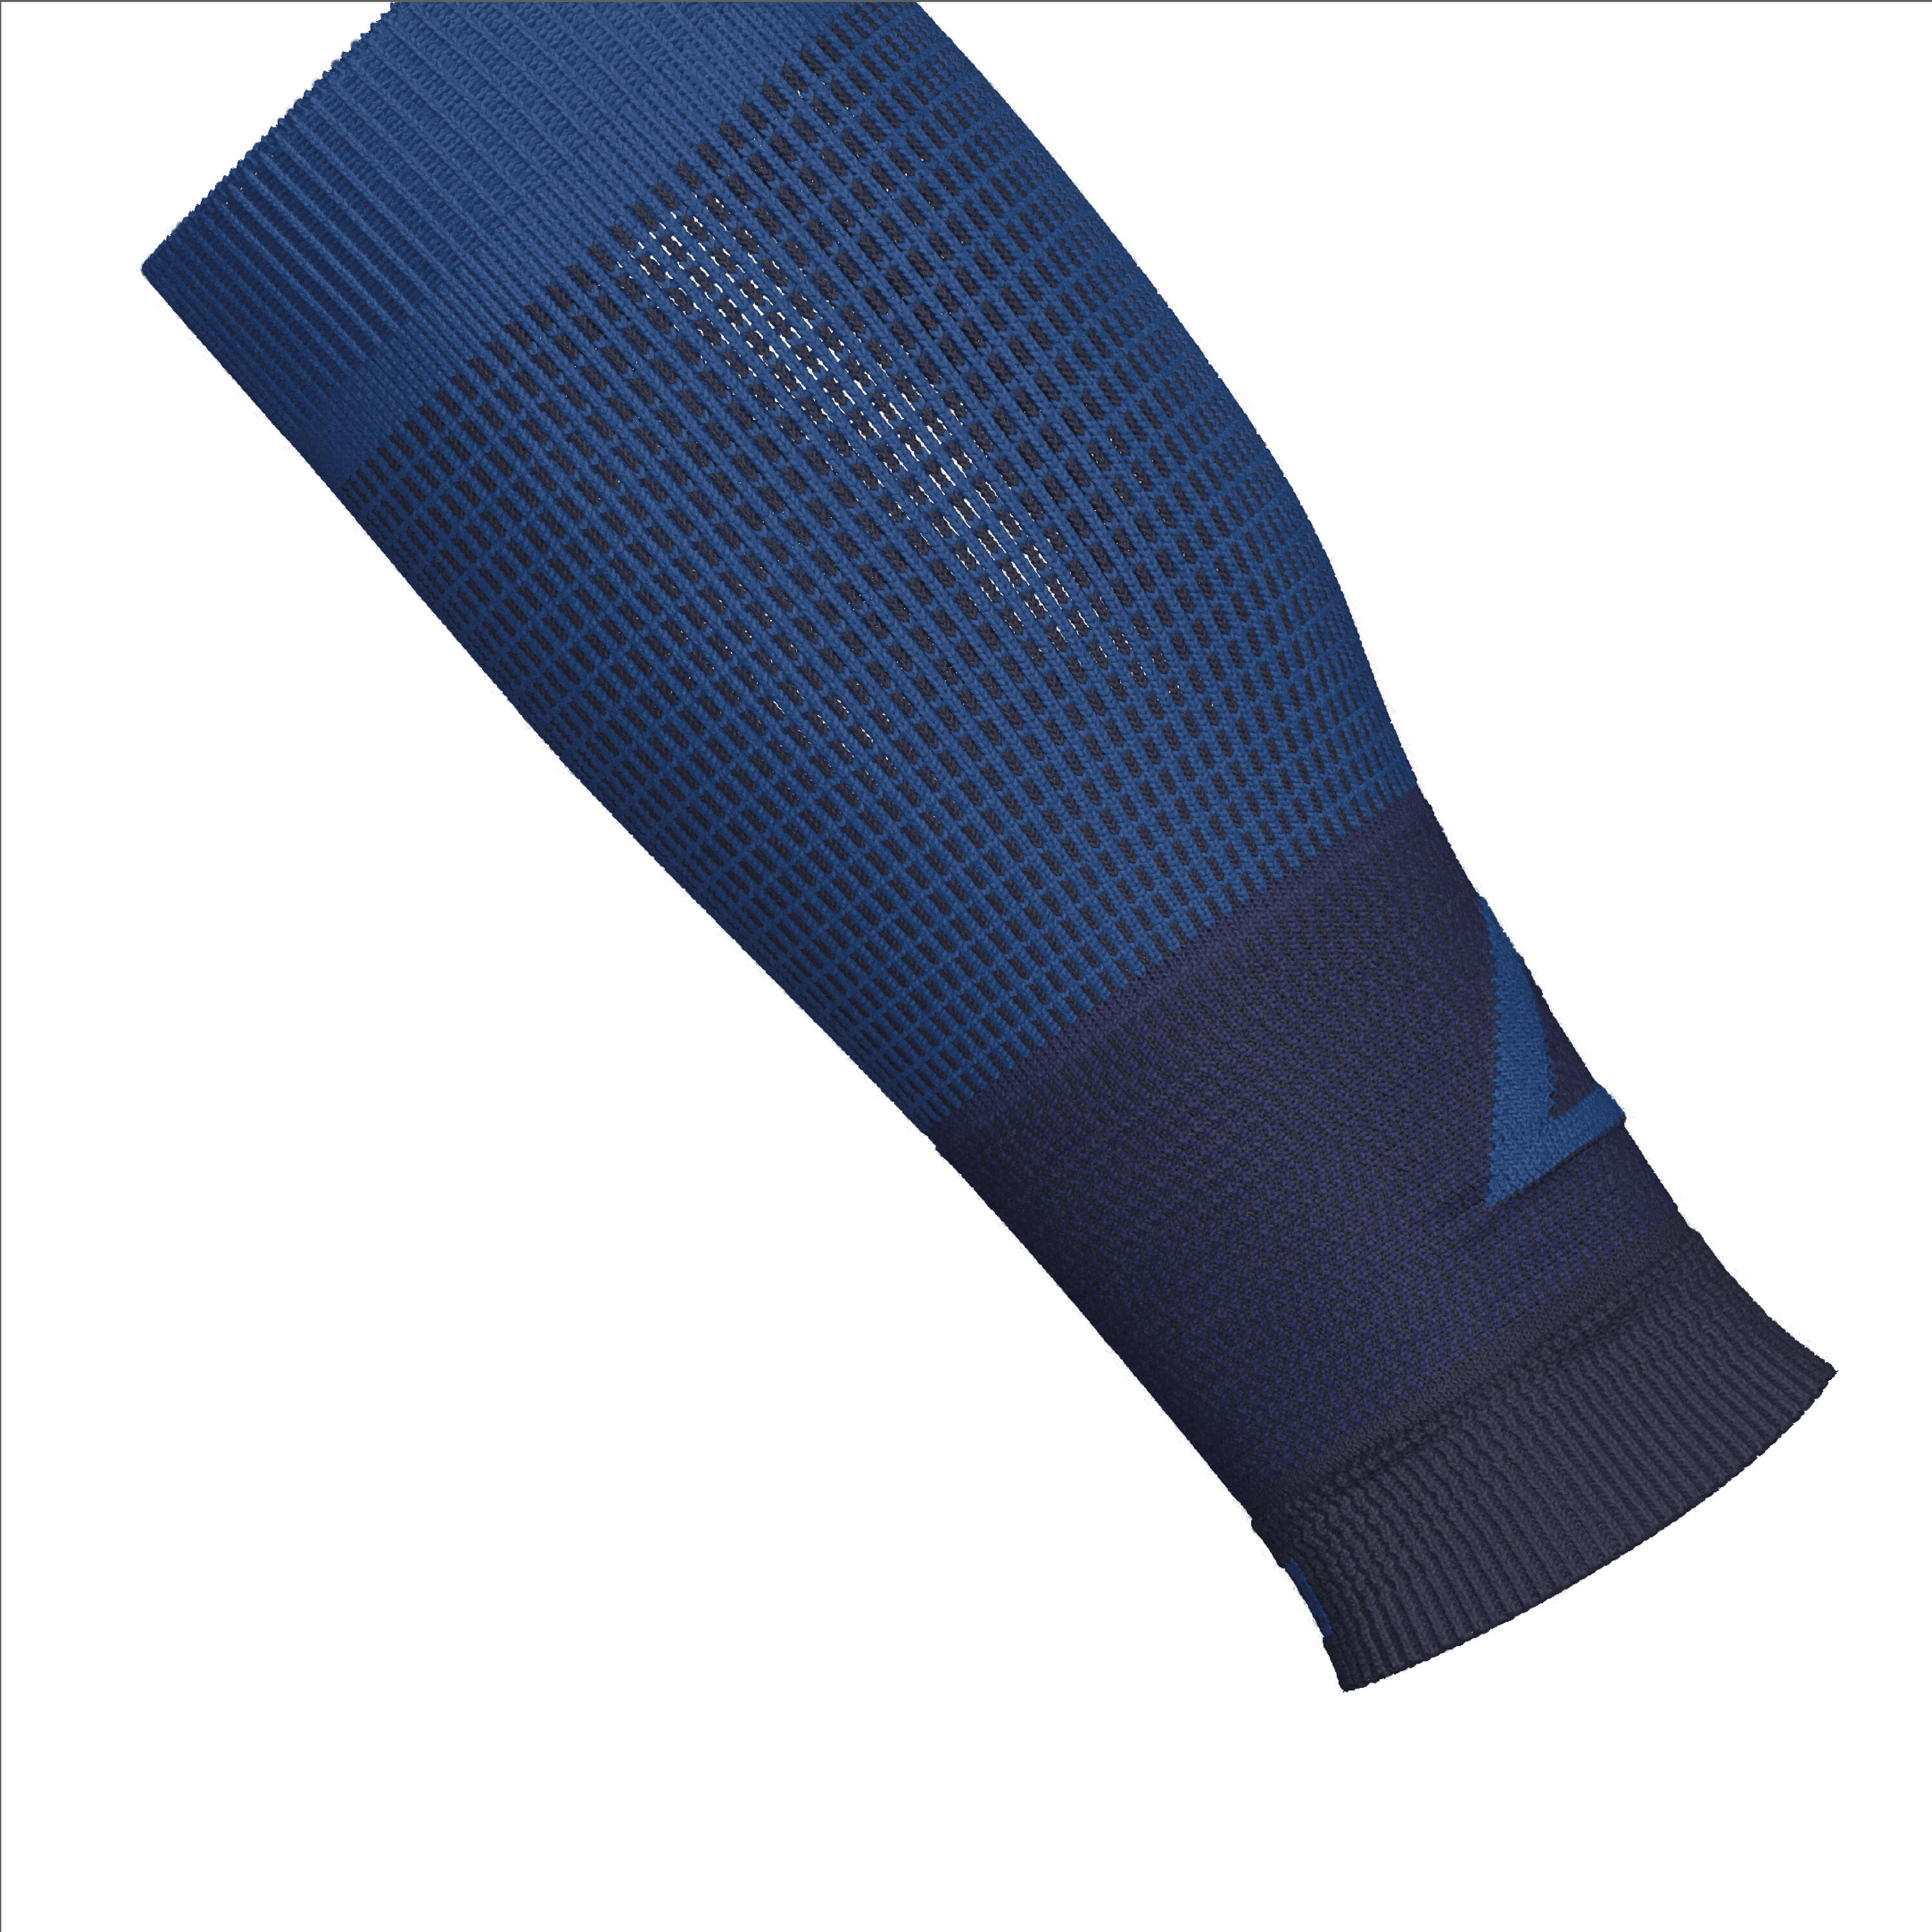 500 COMPRESSION RUNNING SLEEVE 3/5